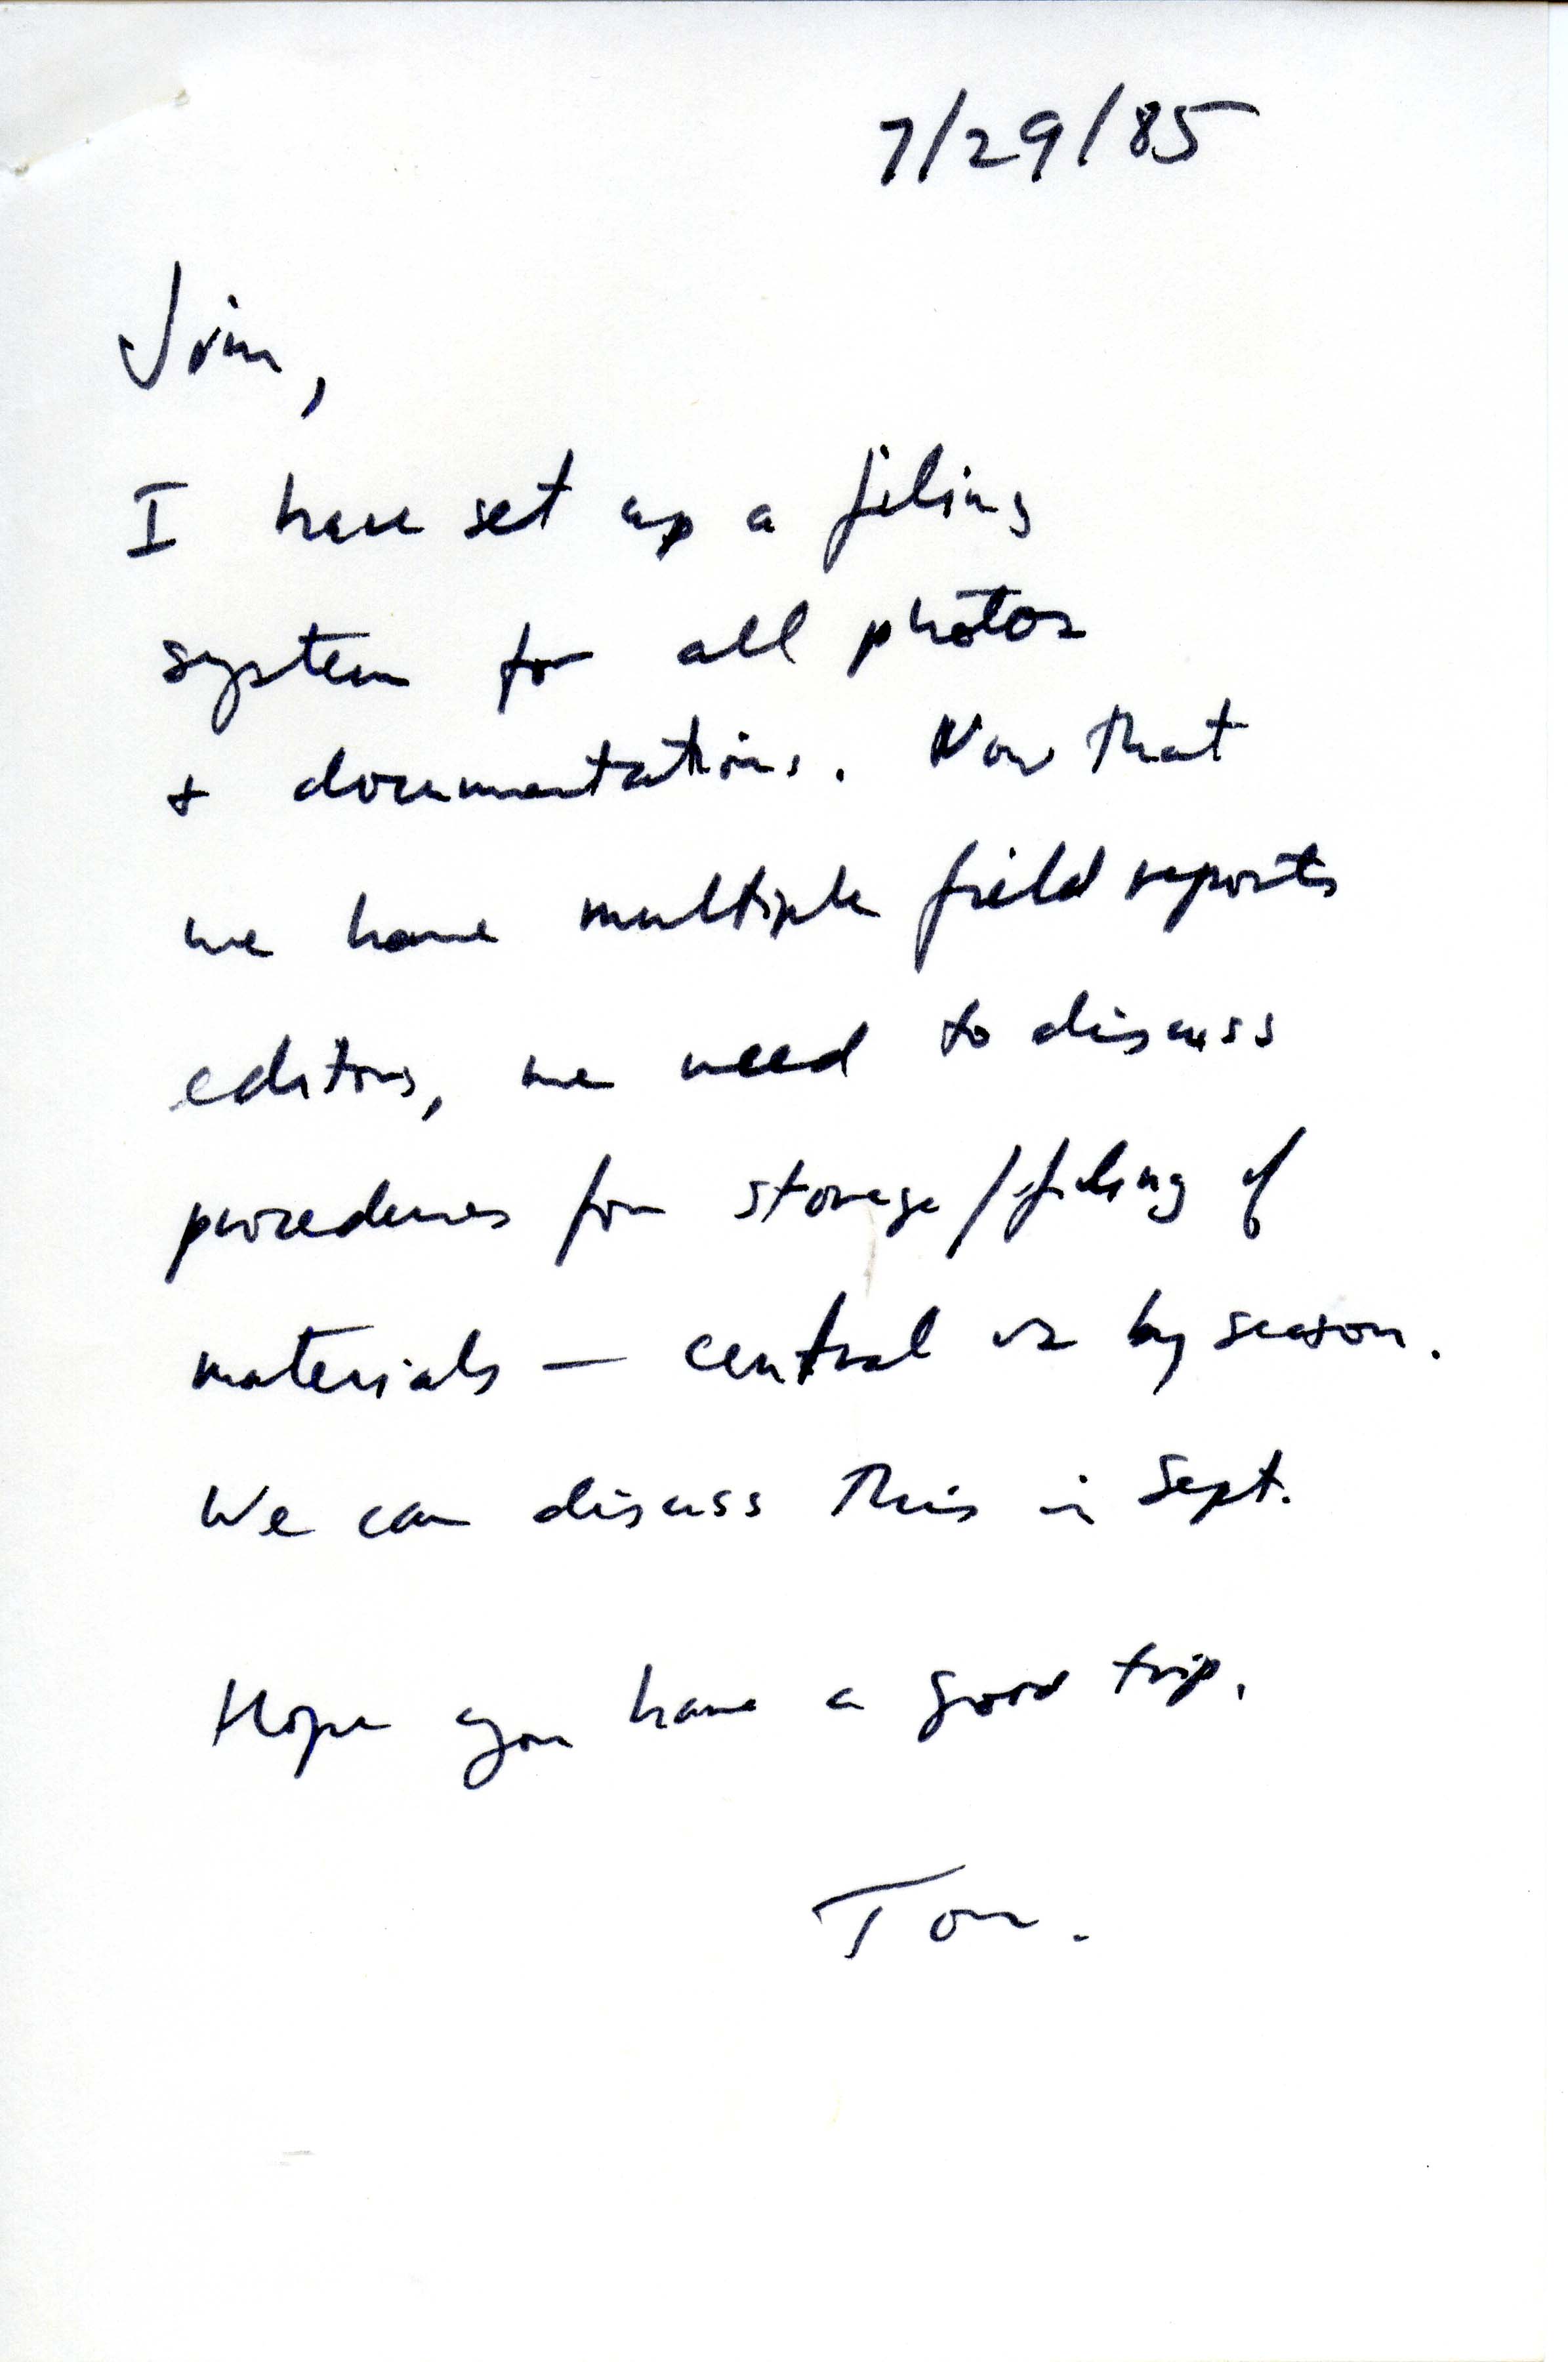 Field notes and Thomas H. Kent letter to James J. Dinsmore, July 29,1985